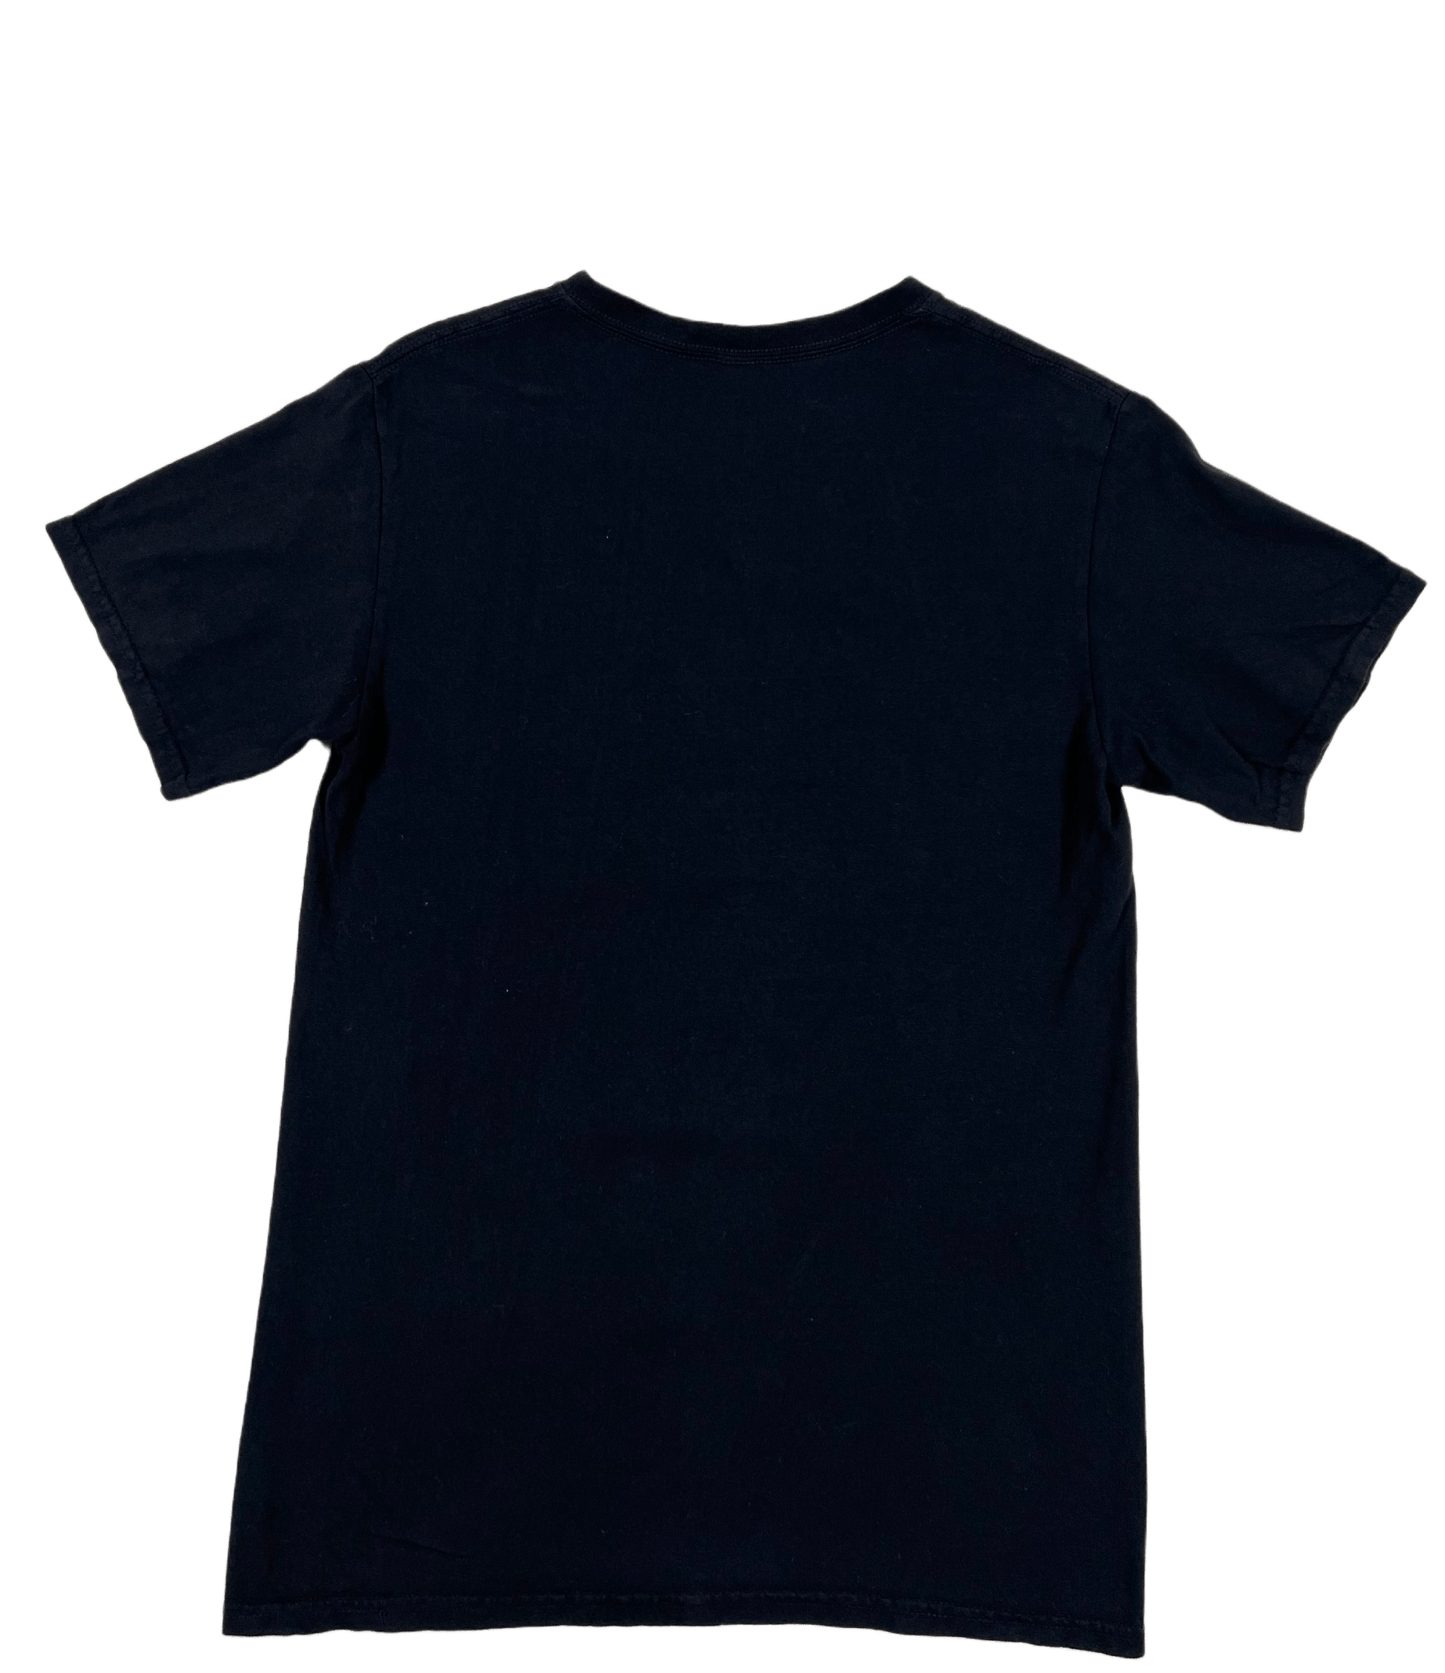 The back of a PLEASURES ENGLISH BREAKFAST T-SHIRT BLACK, printed in USA.